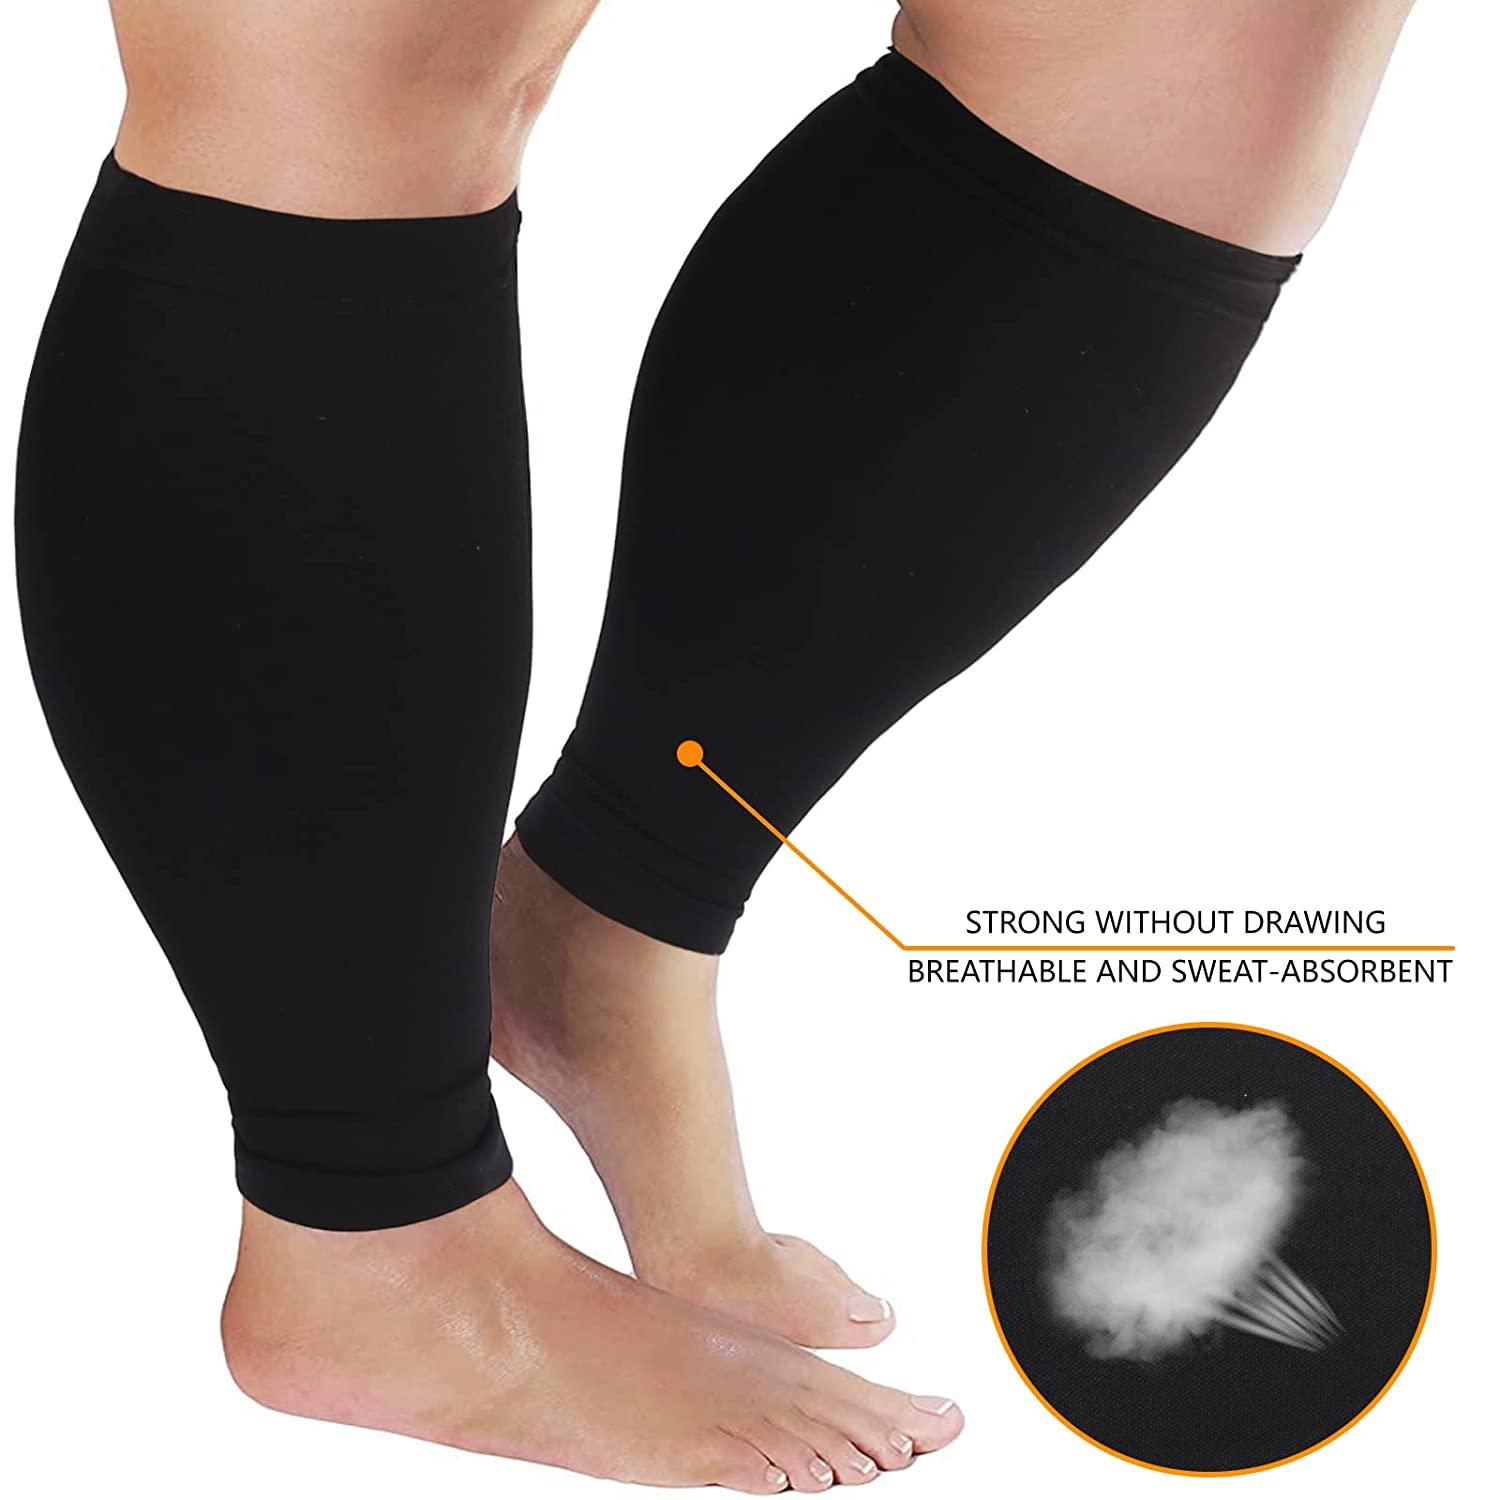 Mama Sox - Enliven Maternity Calf Compression Sleeves in Black